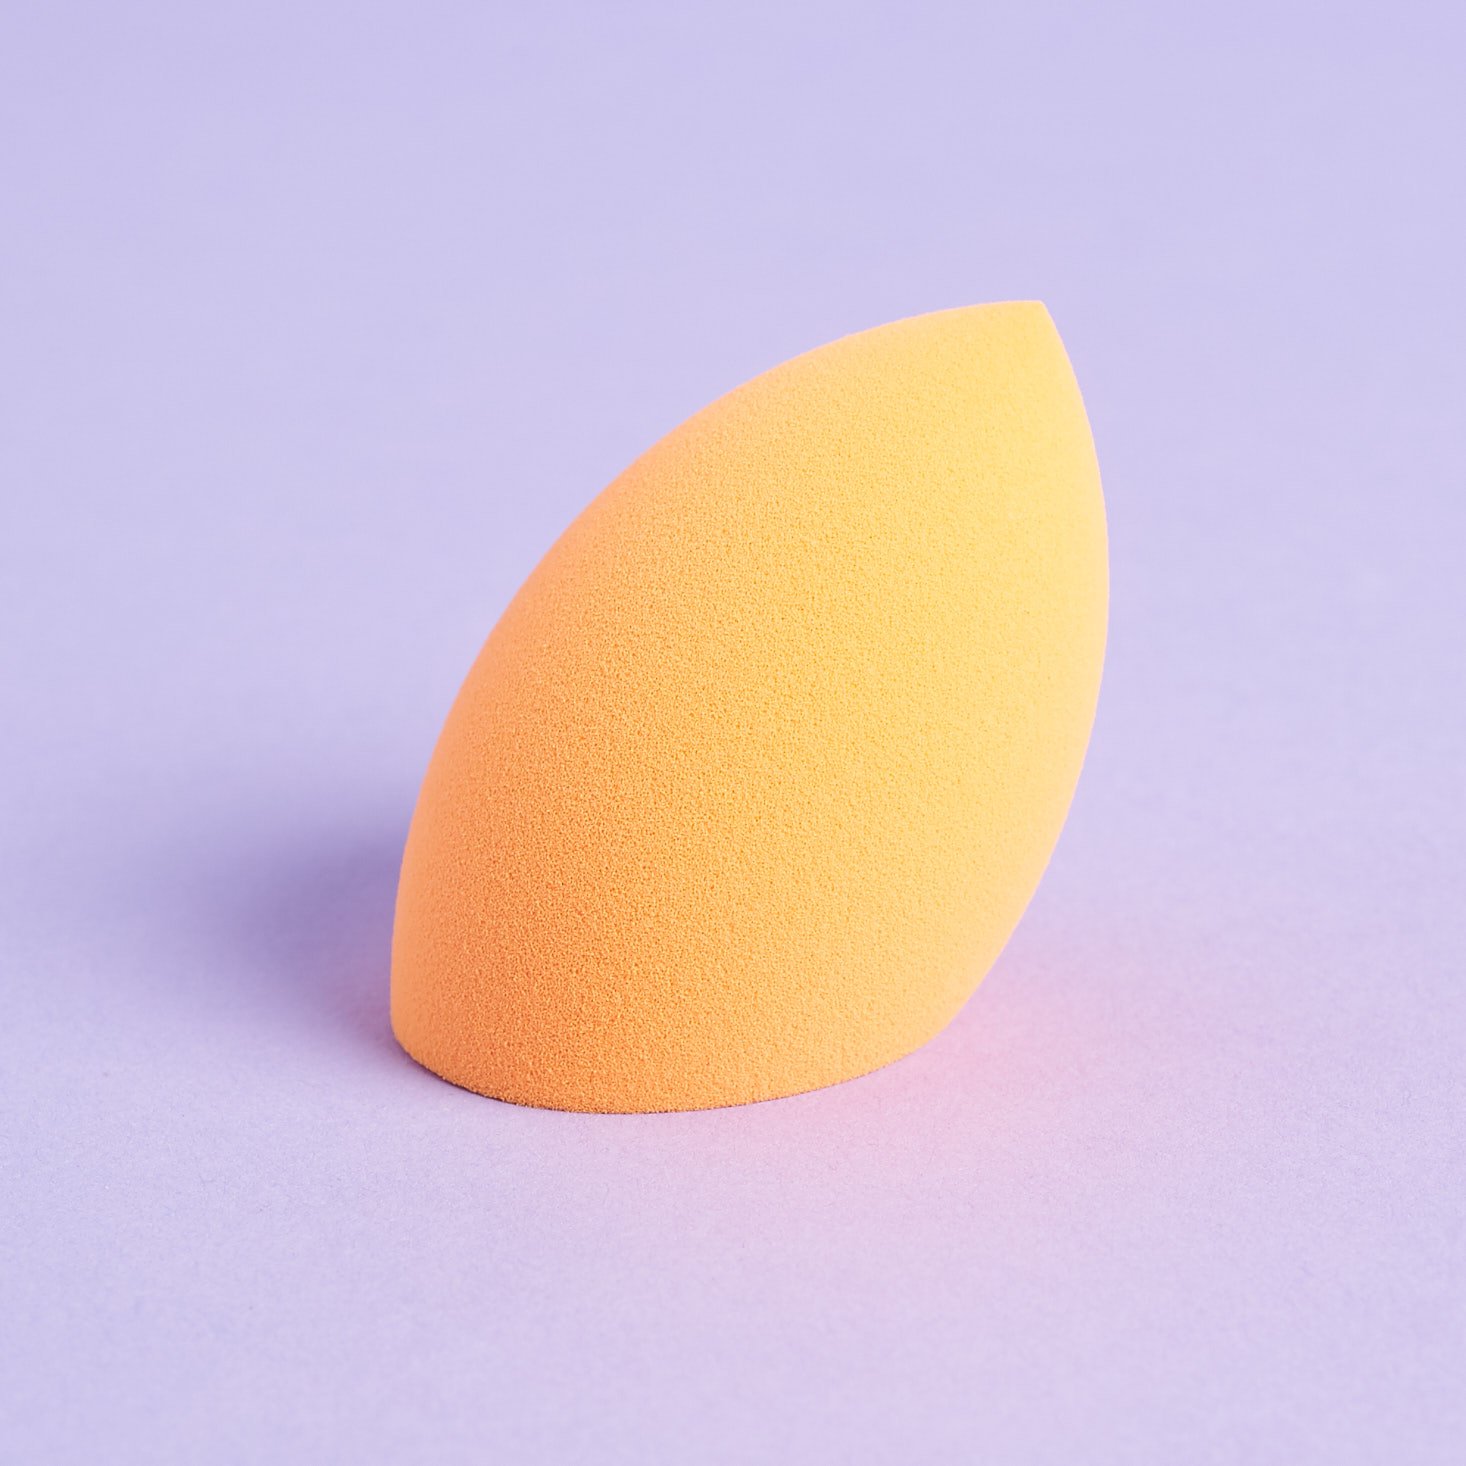 Real Techniques Miracle Complexion Sponge sitting on flat side